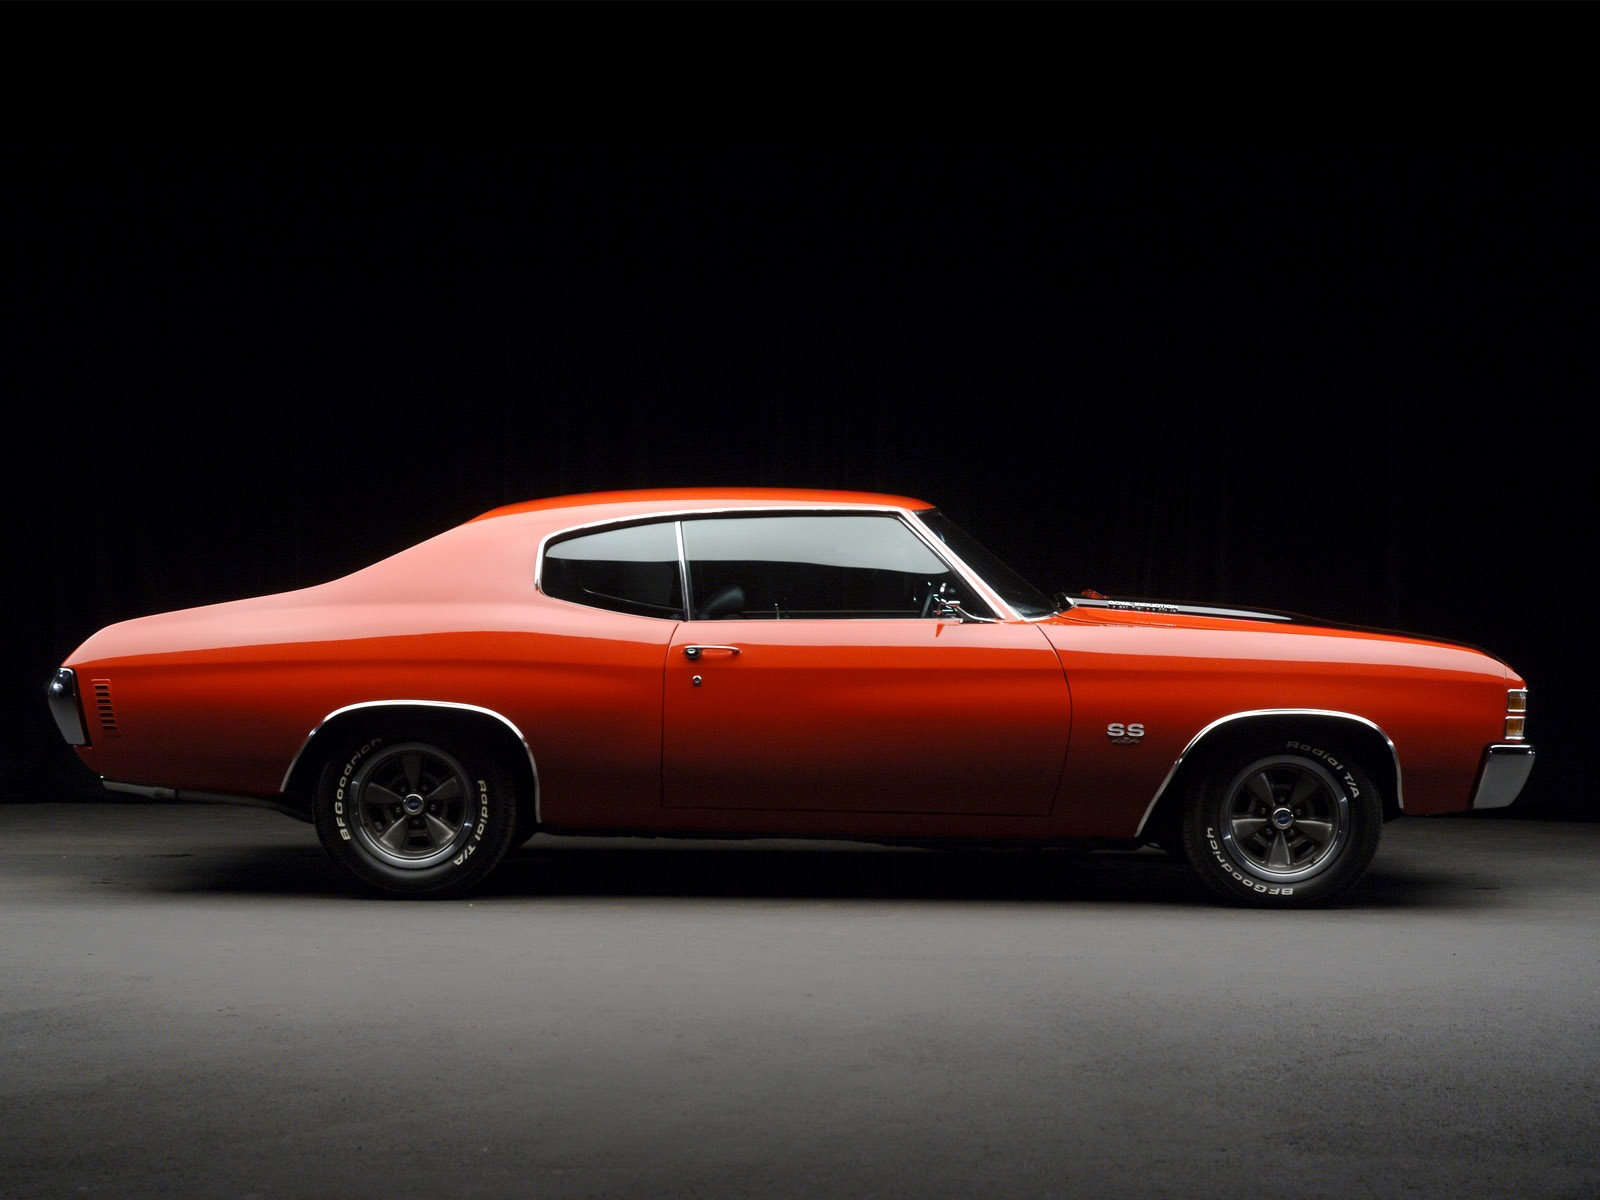 1971 Chevrolet Chevelle S S classic muscle f wallpaper background